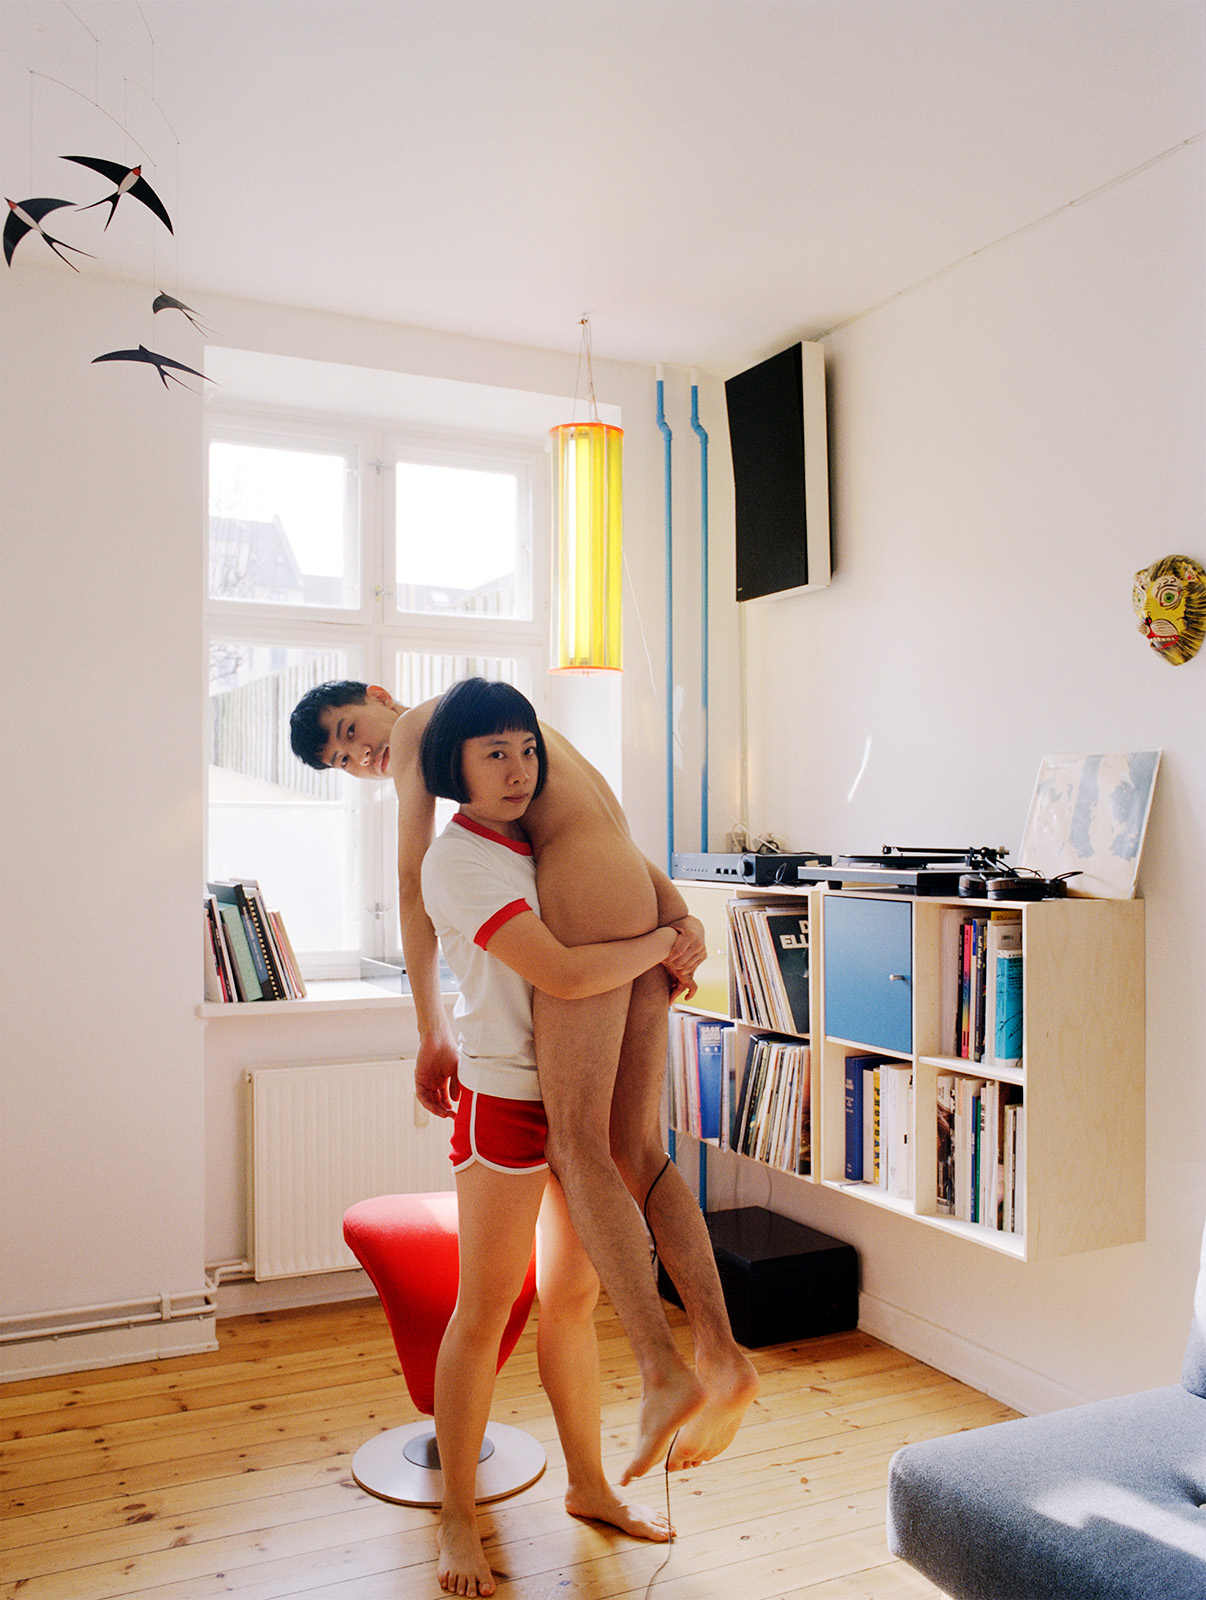 A woman lifts up a naked man in a room with book shelves